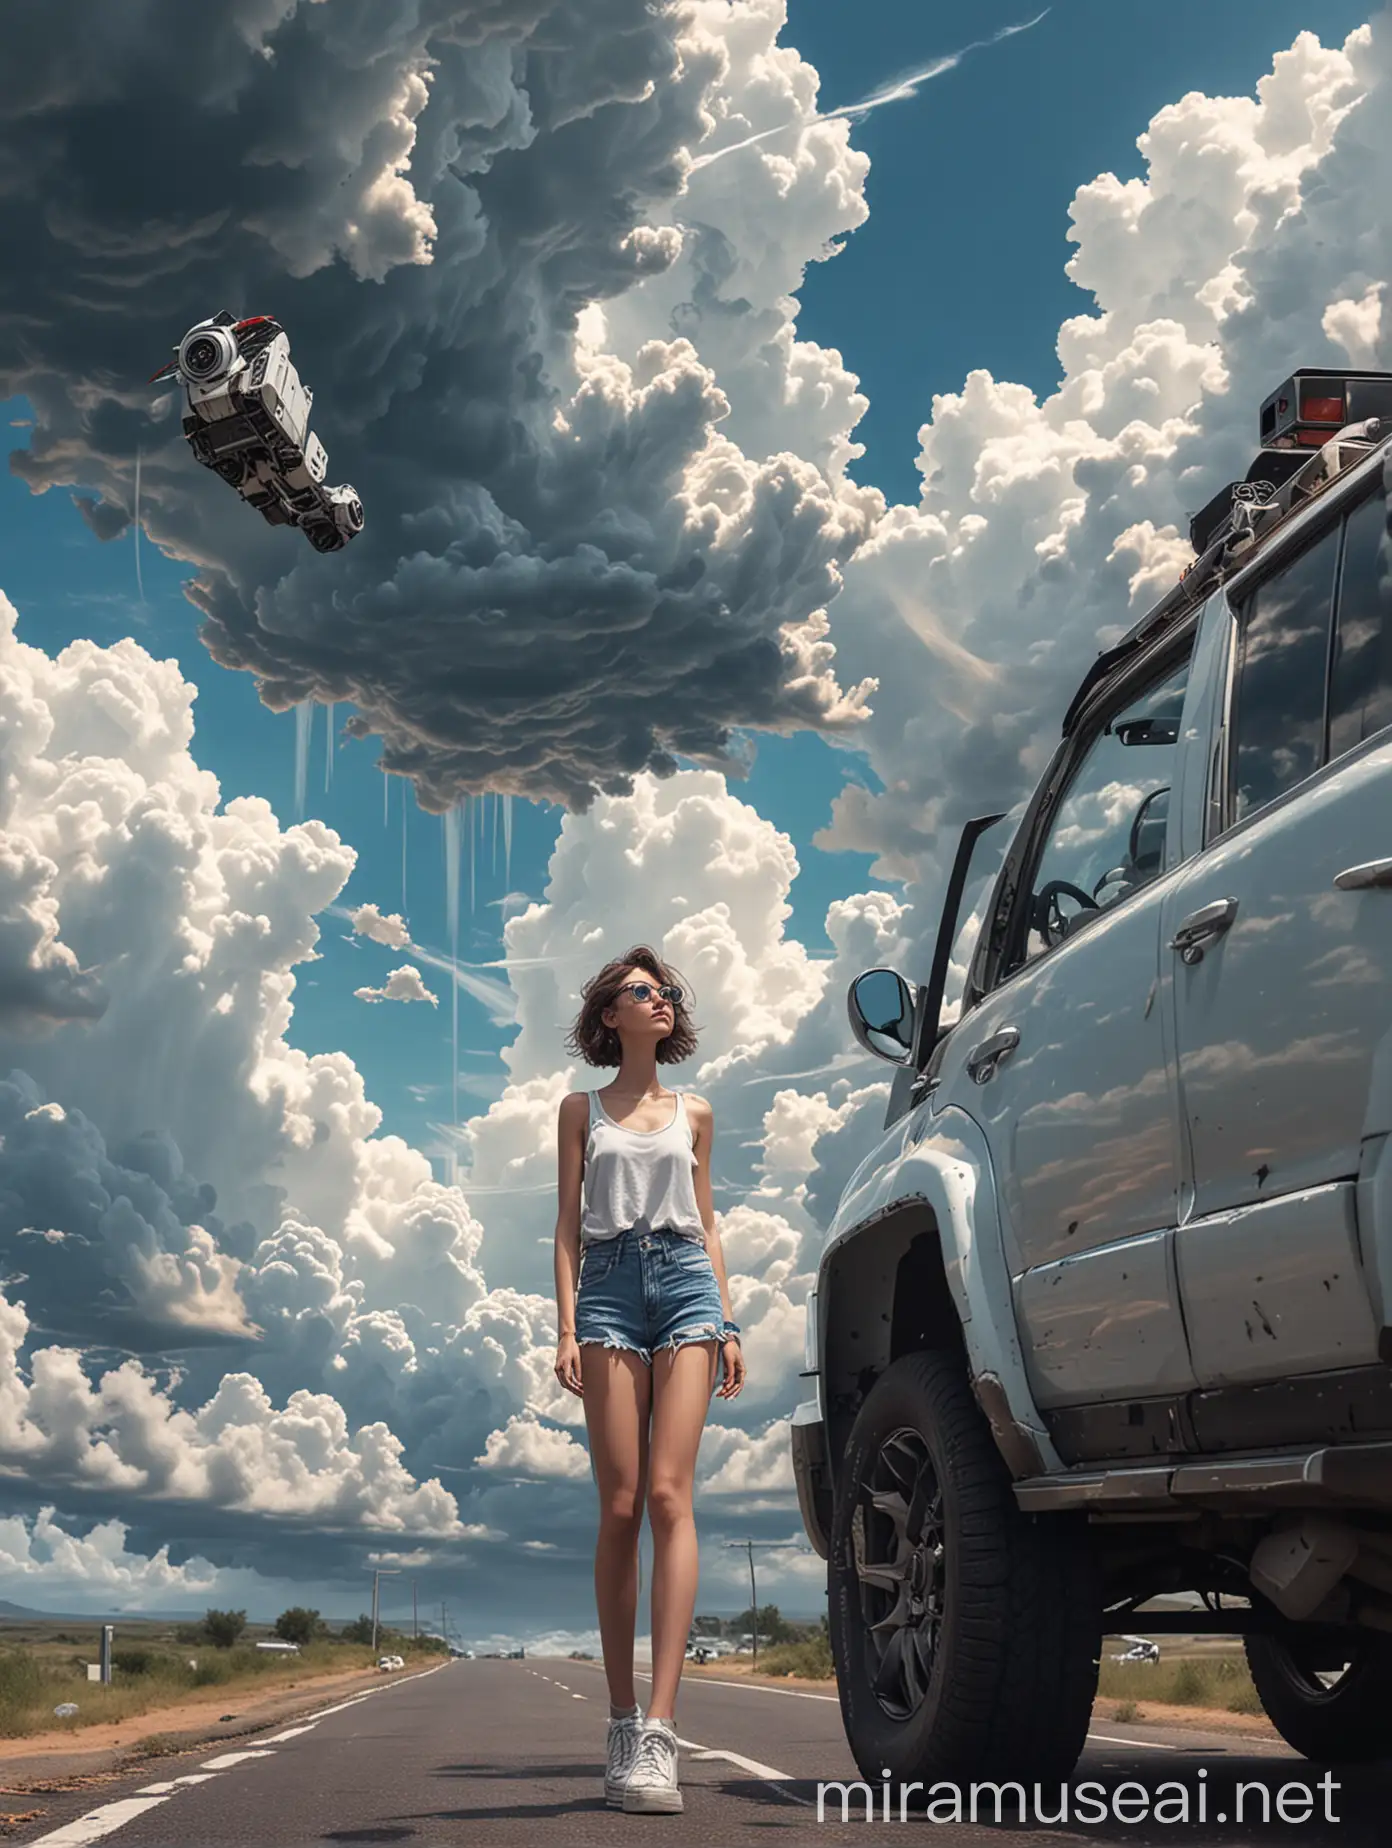 Fashionable Girl with Robot Opening Car Door under Towering Clouds